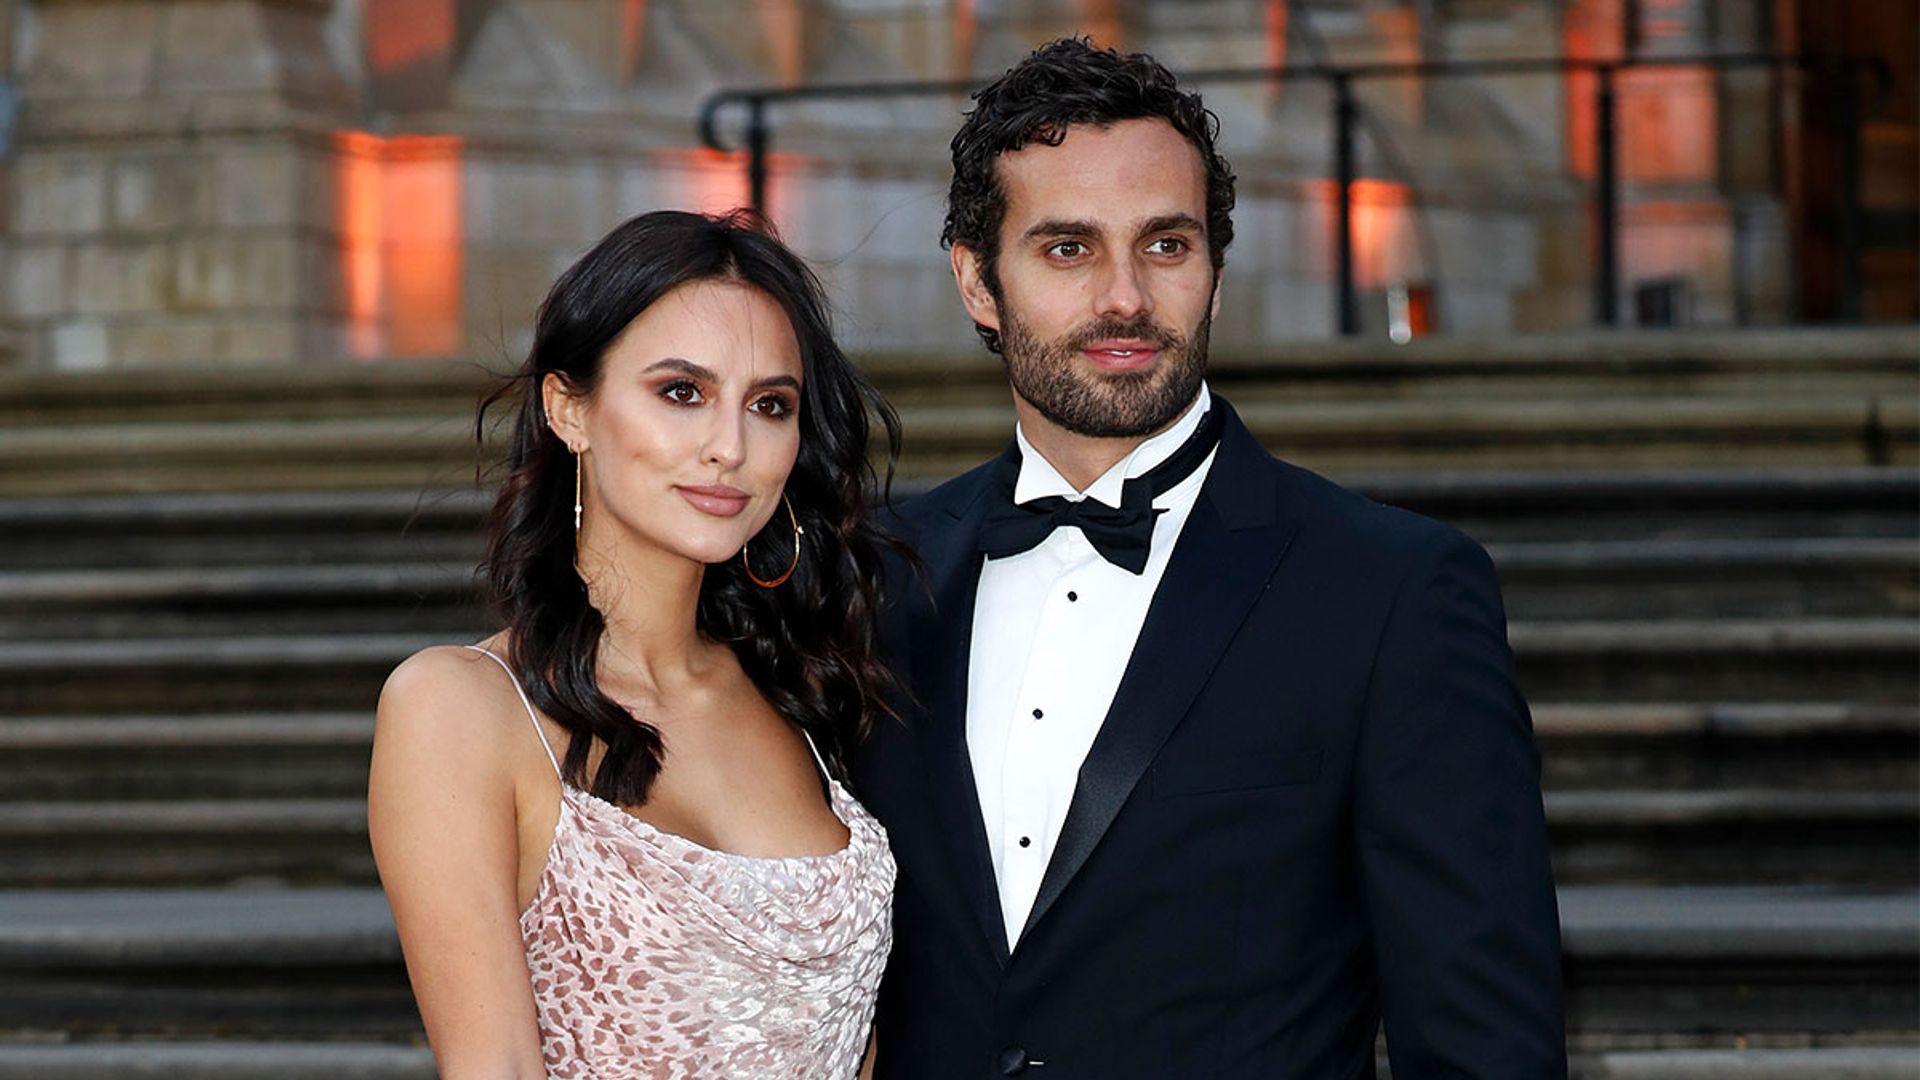 lucy watson engaged wedding plans